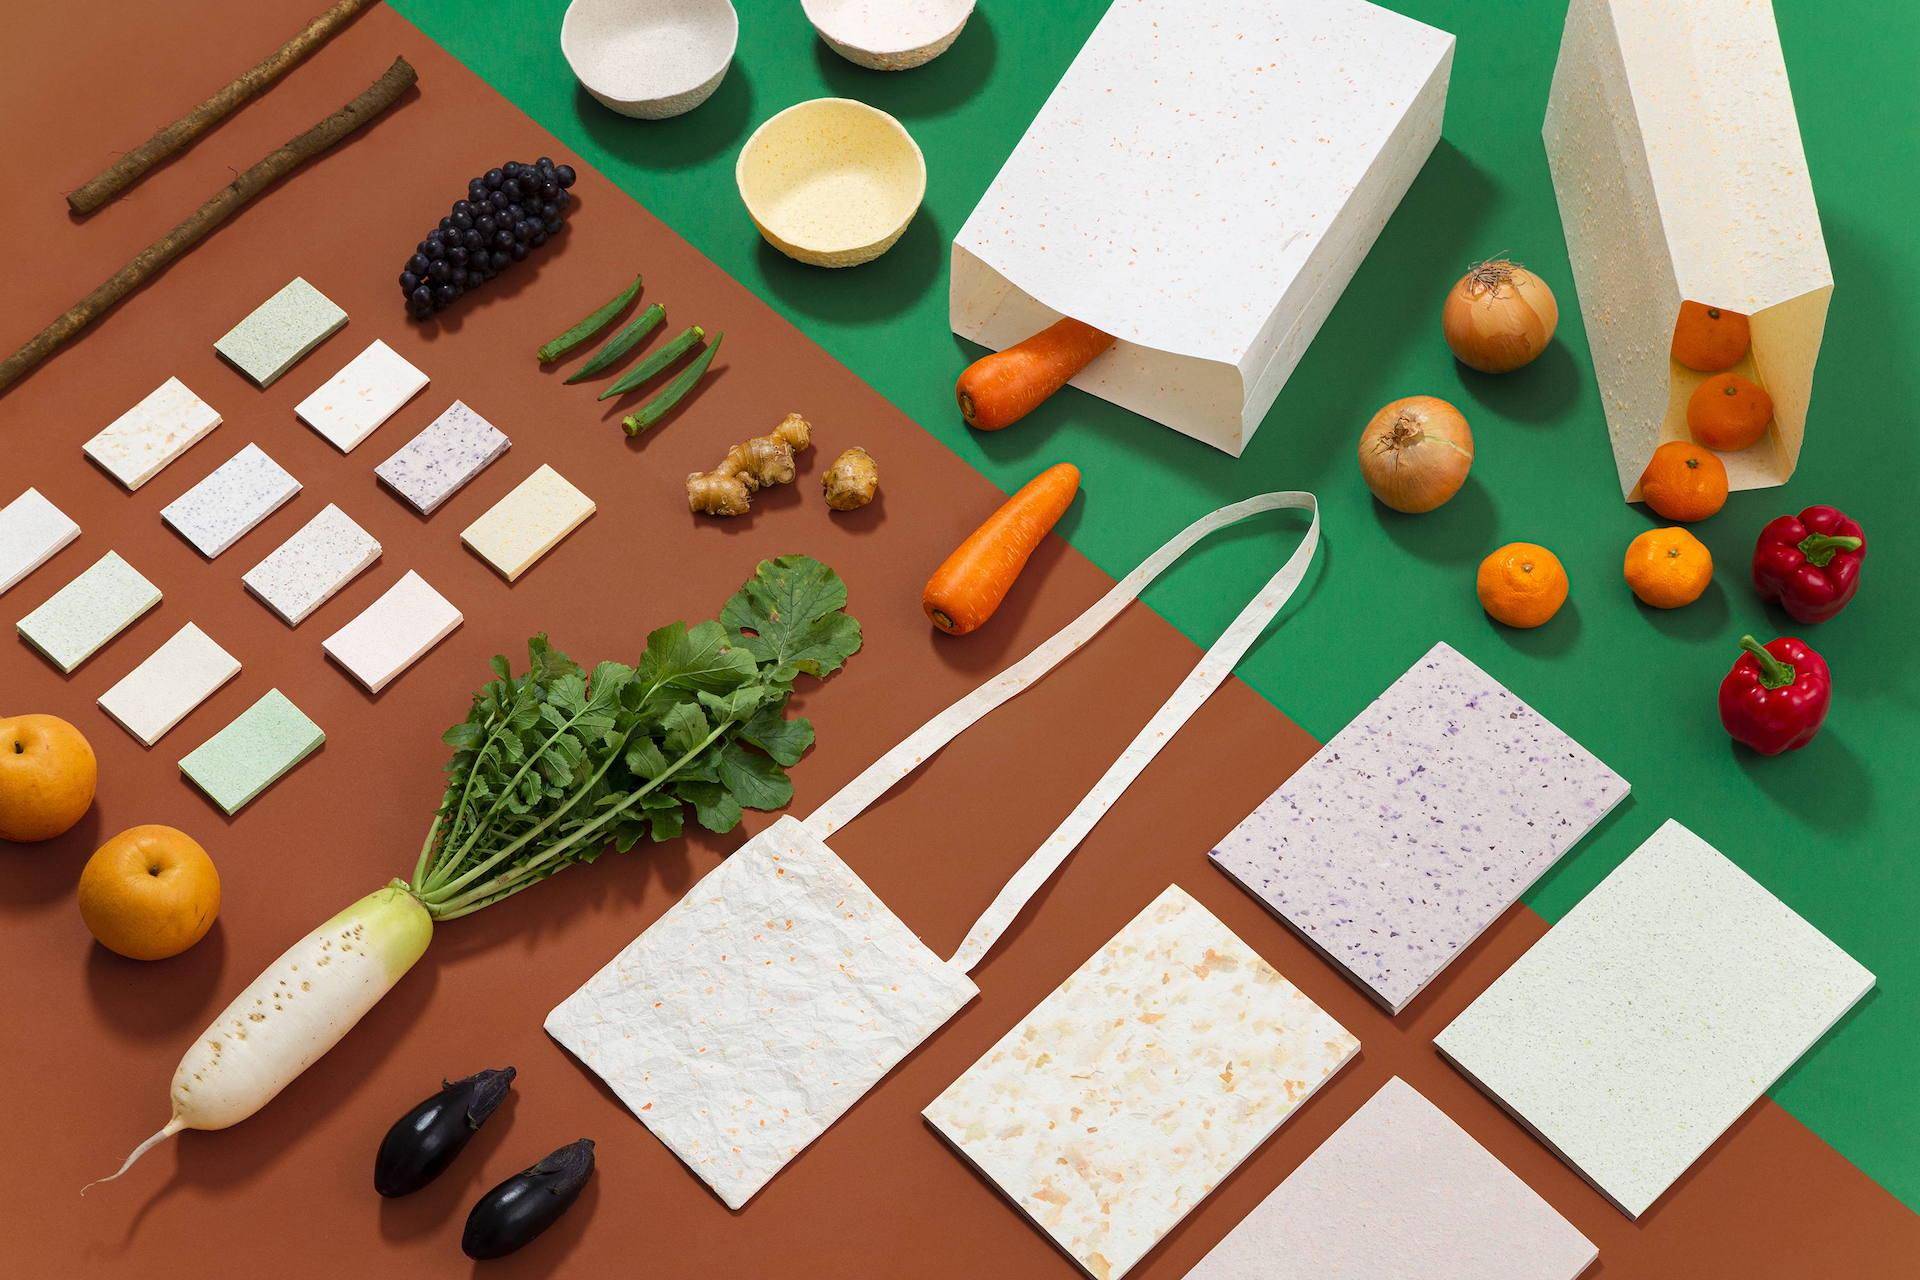 Food Paper, produced by Igarashi Paper, is fully biodegradable and uses vegetable and fruit waste to color and texture Japanese washi paper. | IGARASHI PAPER